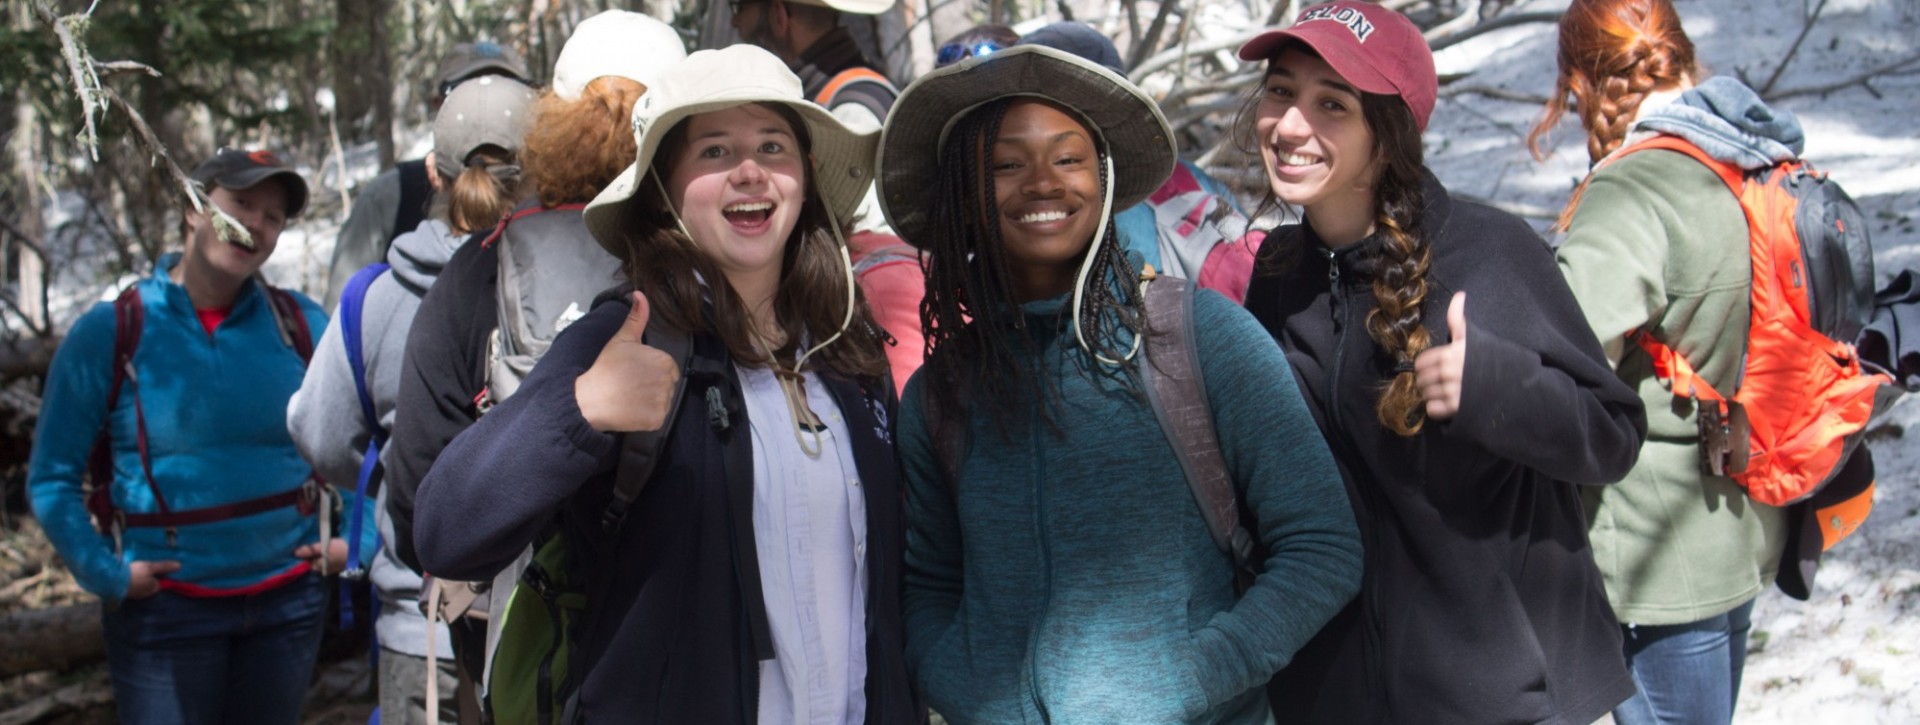 Students on field trip, in hats, smiling